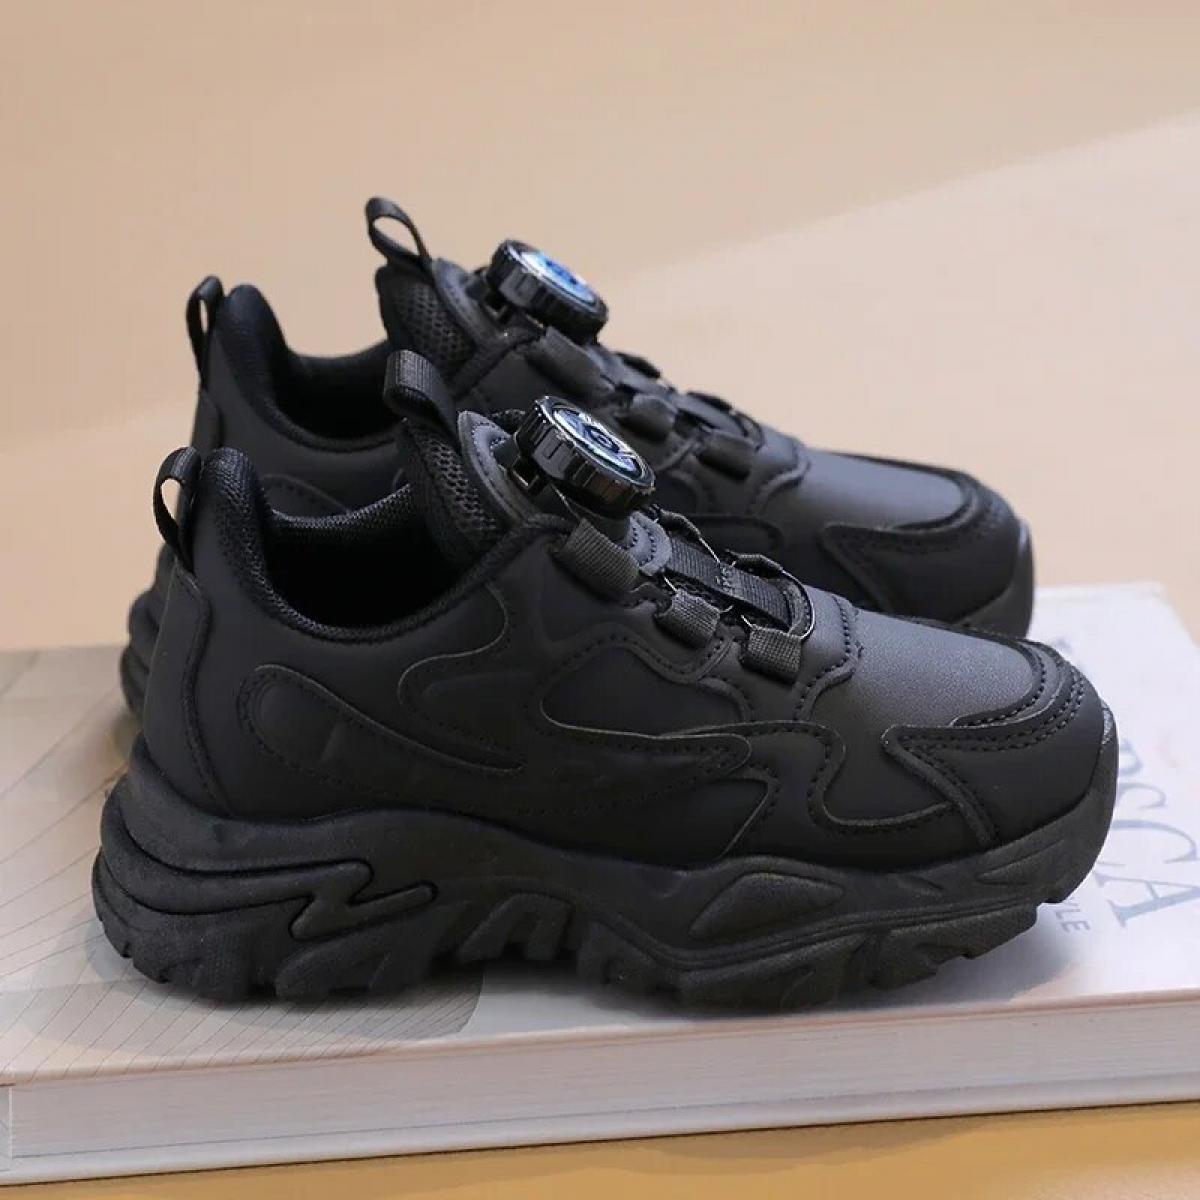 Children's Sneakers For Boy Girl Sports Shoe Kids Casual Outdoor Lightweight Soft Breathable Lace Up Fashion Trendy All 